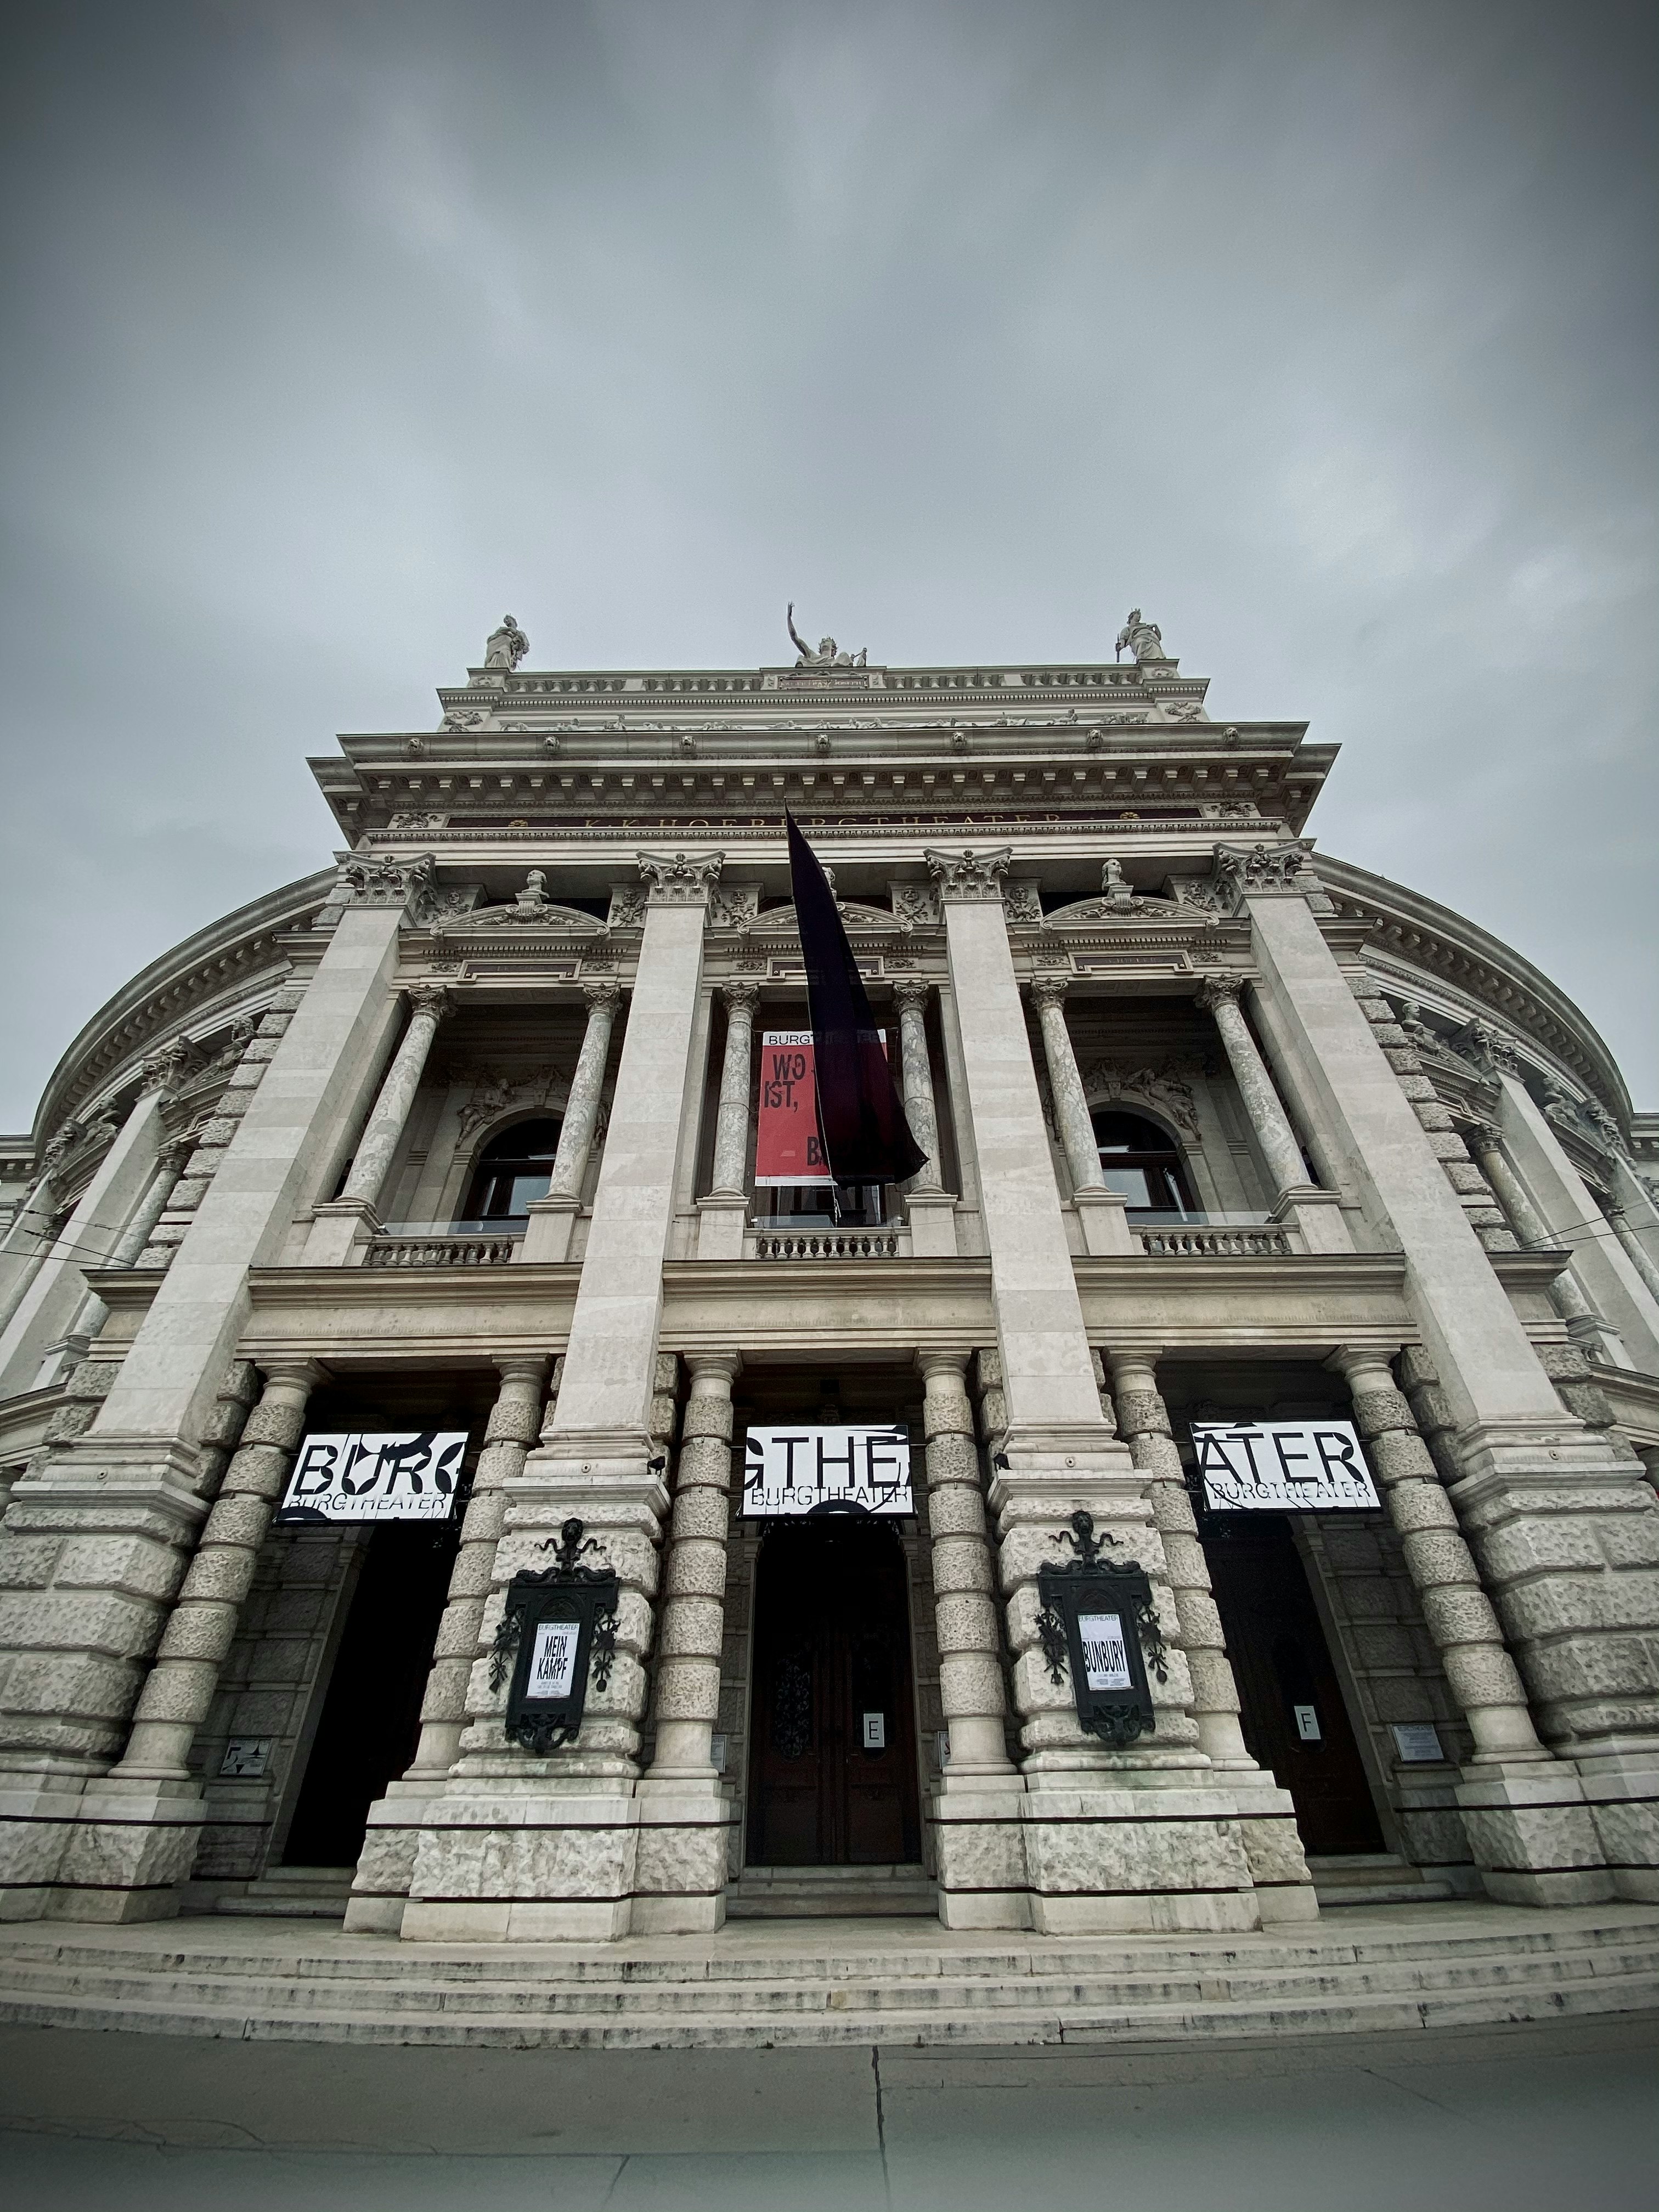 Flags at half-mast for days of mourning after Vienna terror attacks that killed 4 innocent people and wounded 23. Here Burgtheater.